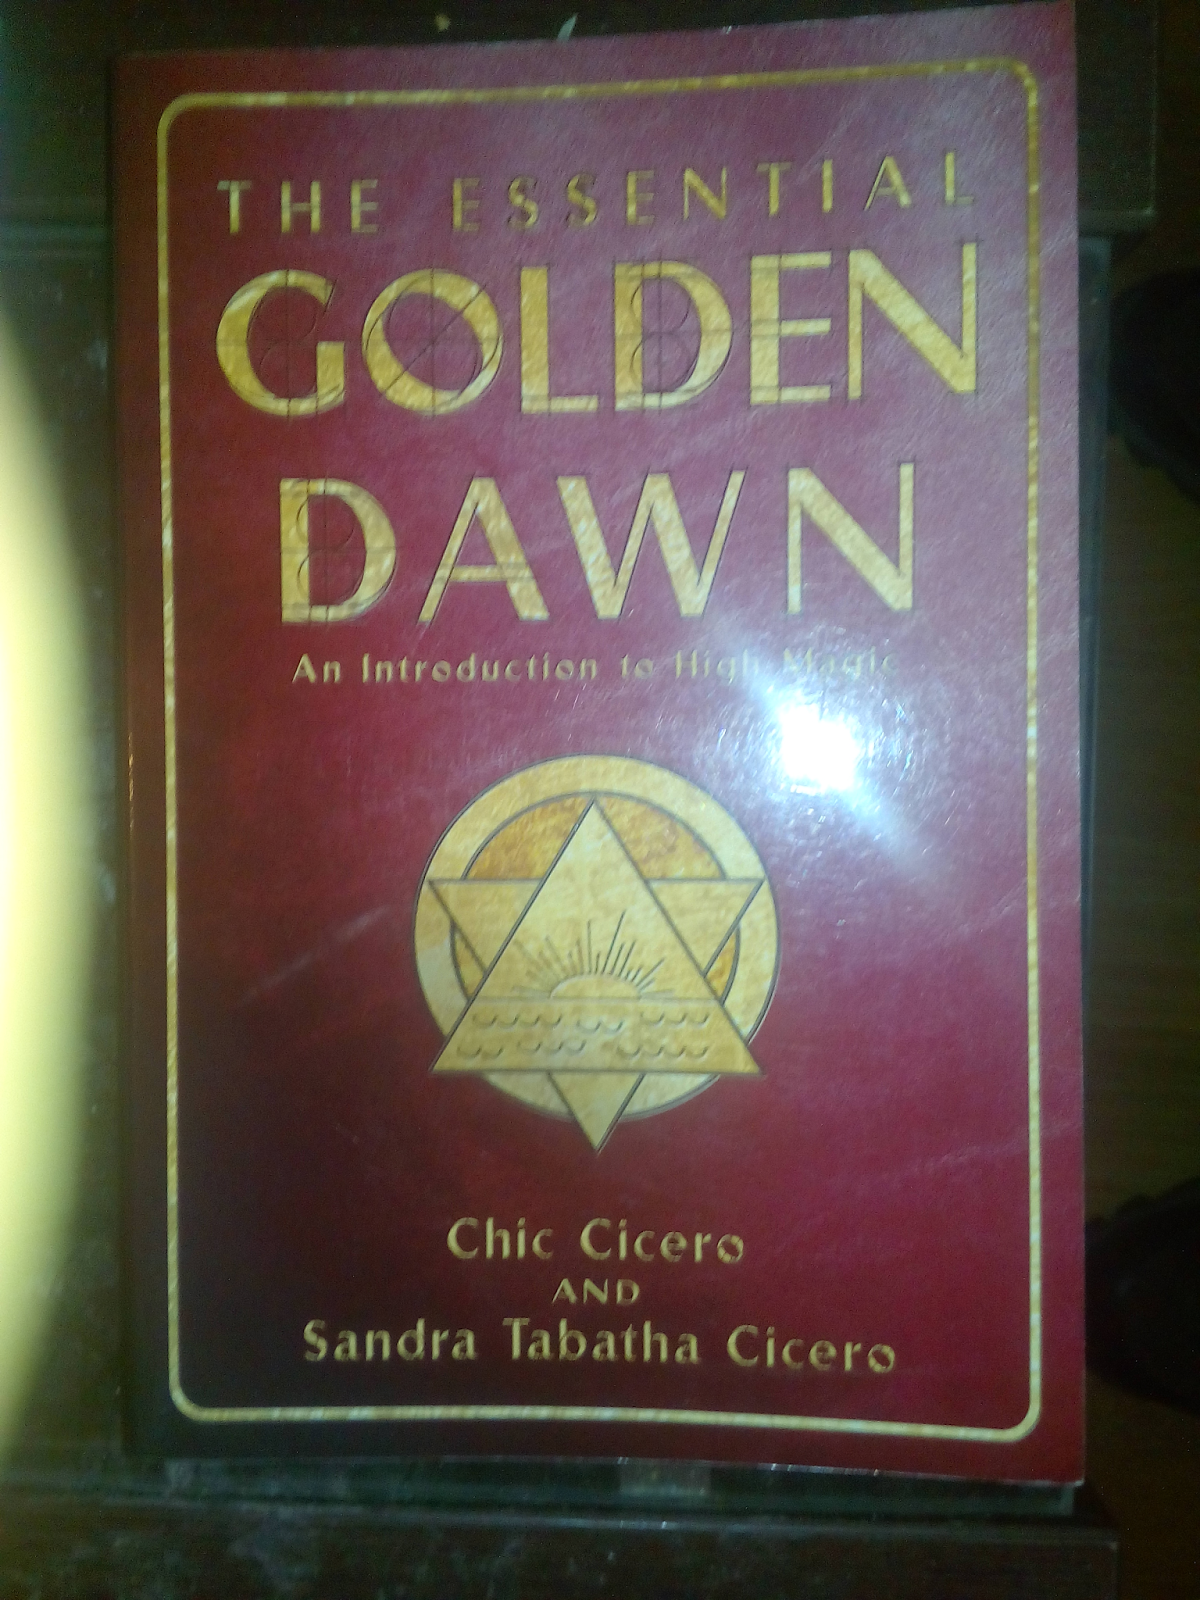 'The Essential Golden Dawn. An Introduction to High Magic'